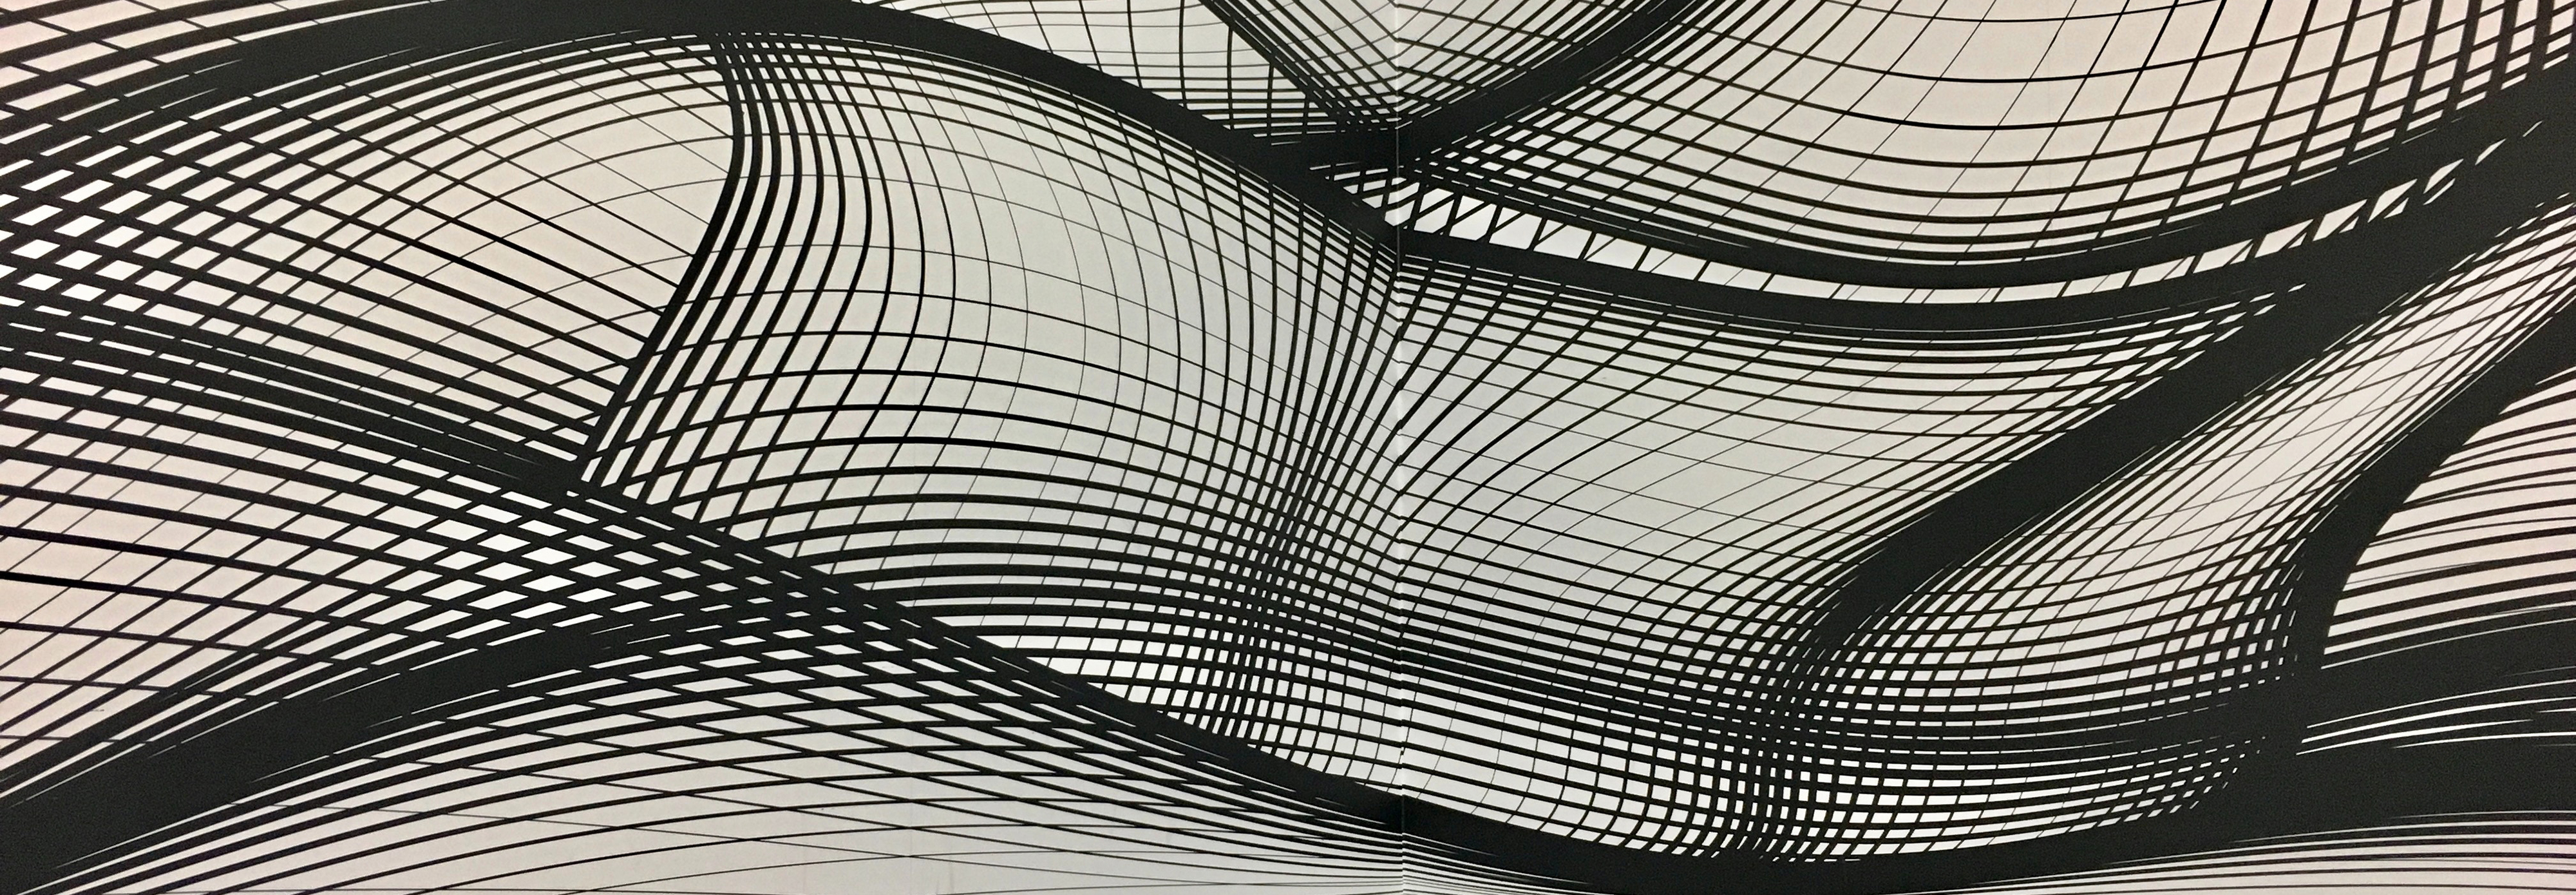 Black and white wave mesh image